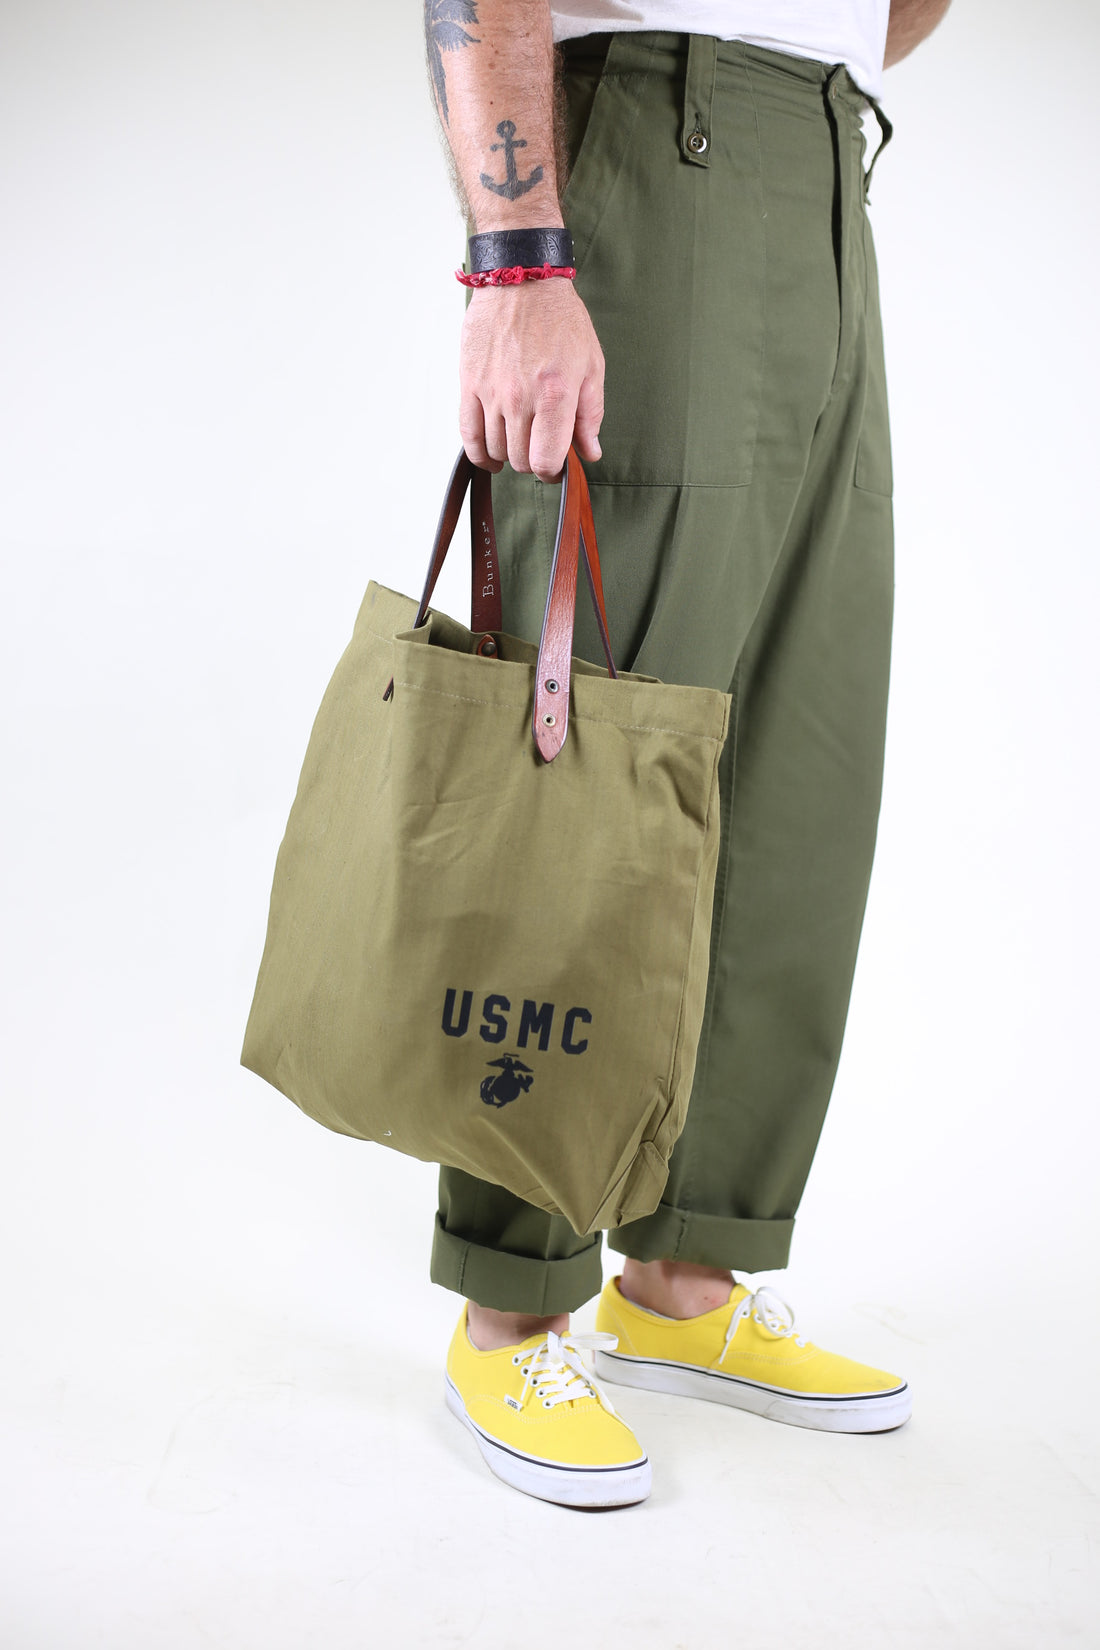 Tote Bag in HBT wwii